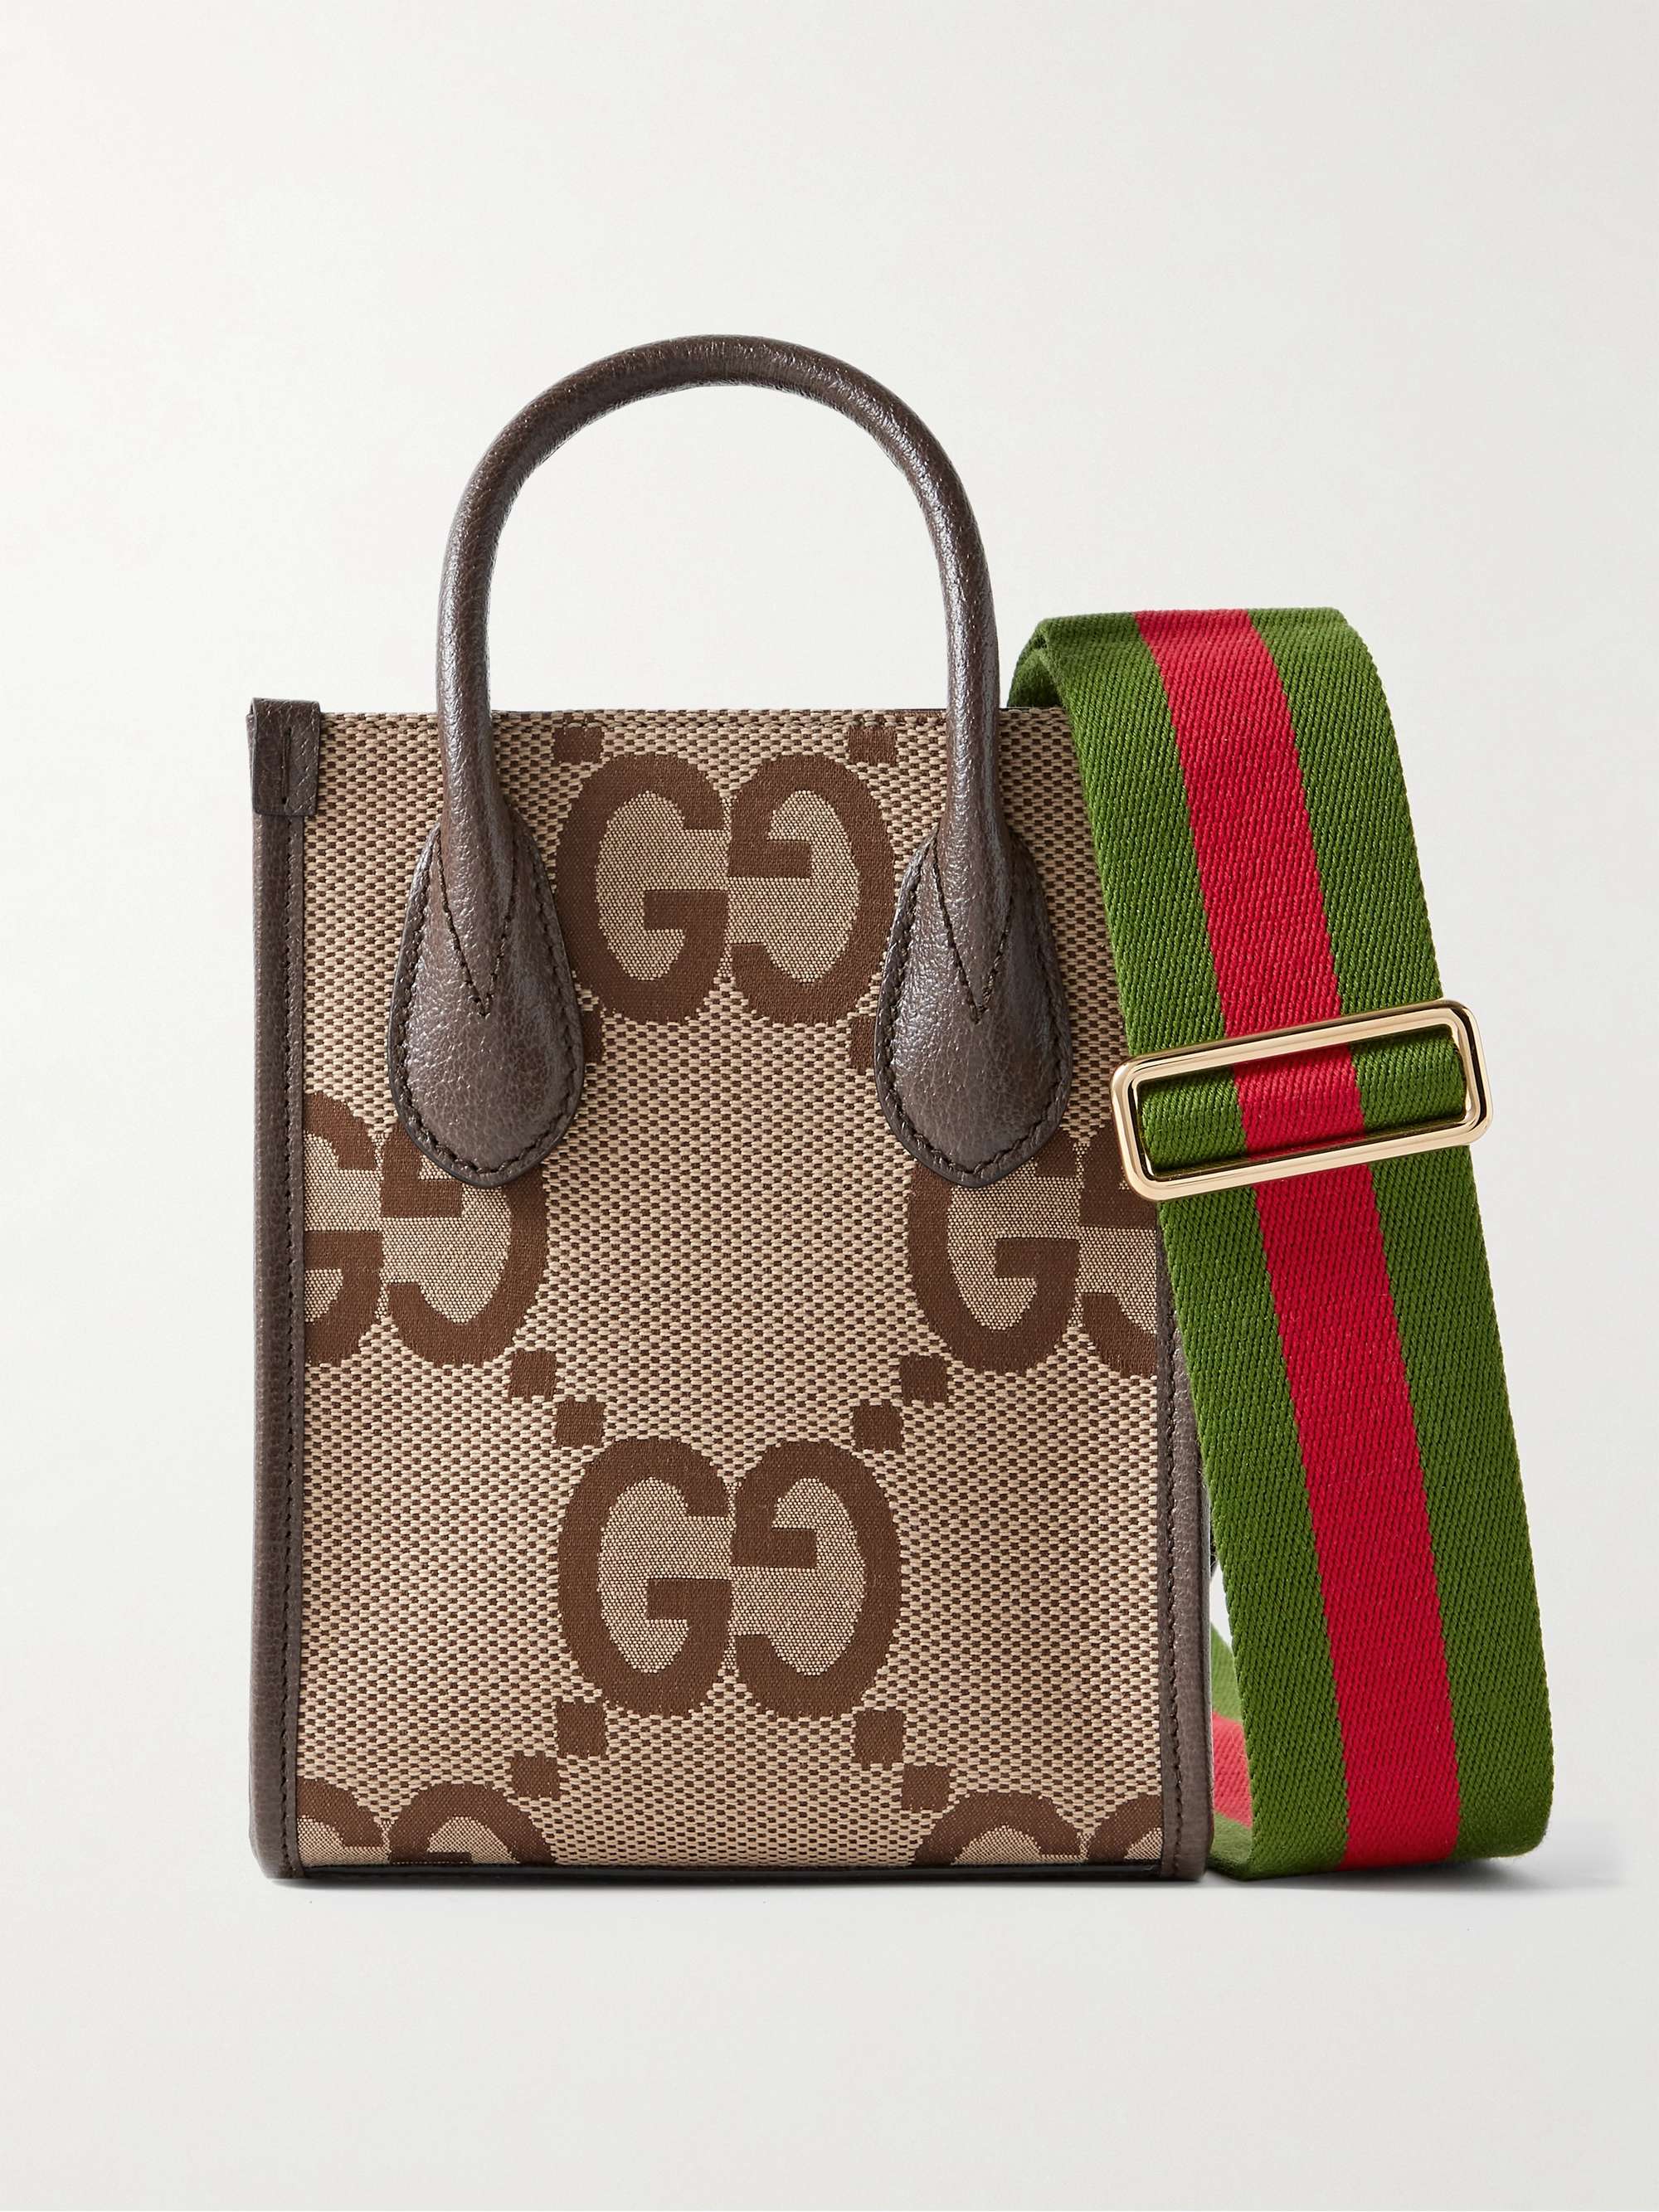 GUCCI Mini Full-Grain Leather-Trimmed Monogrammed Canvas Tote Bag